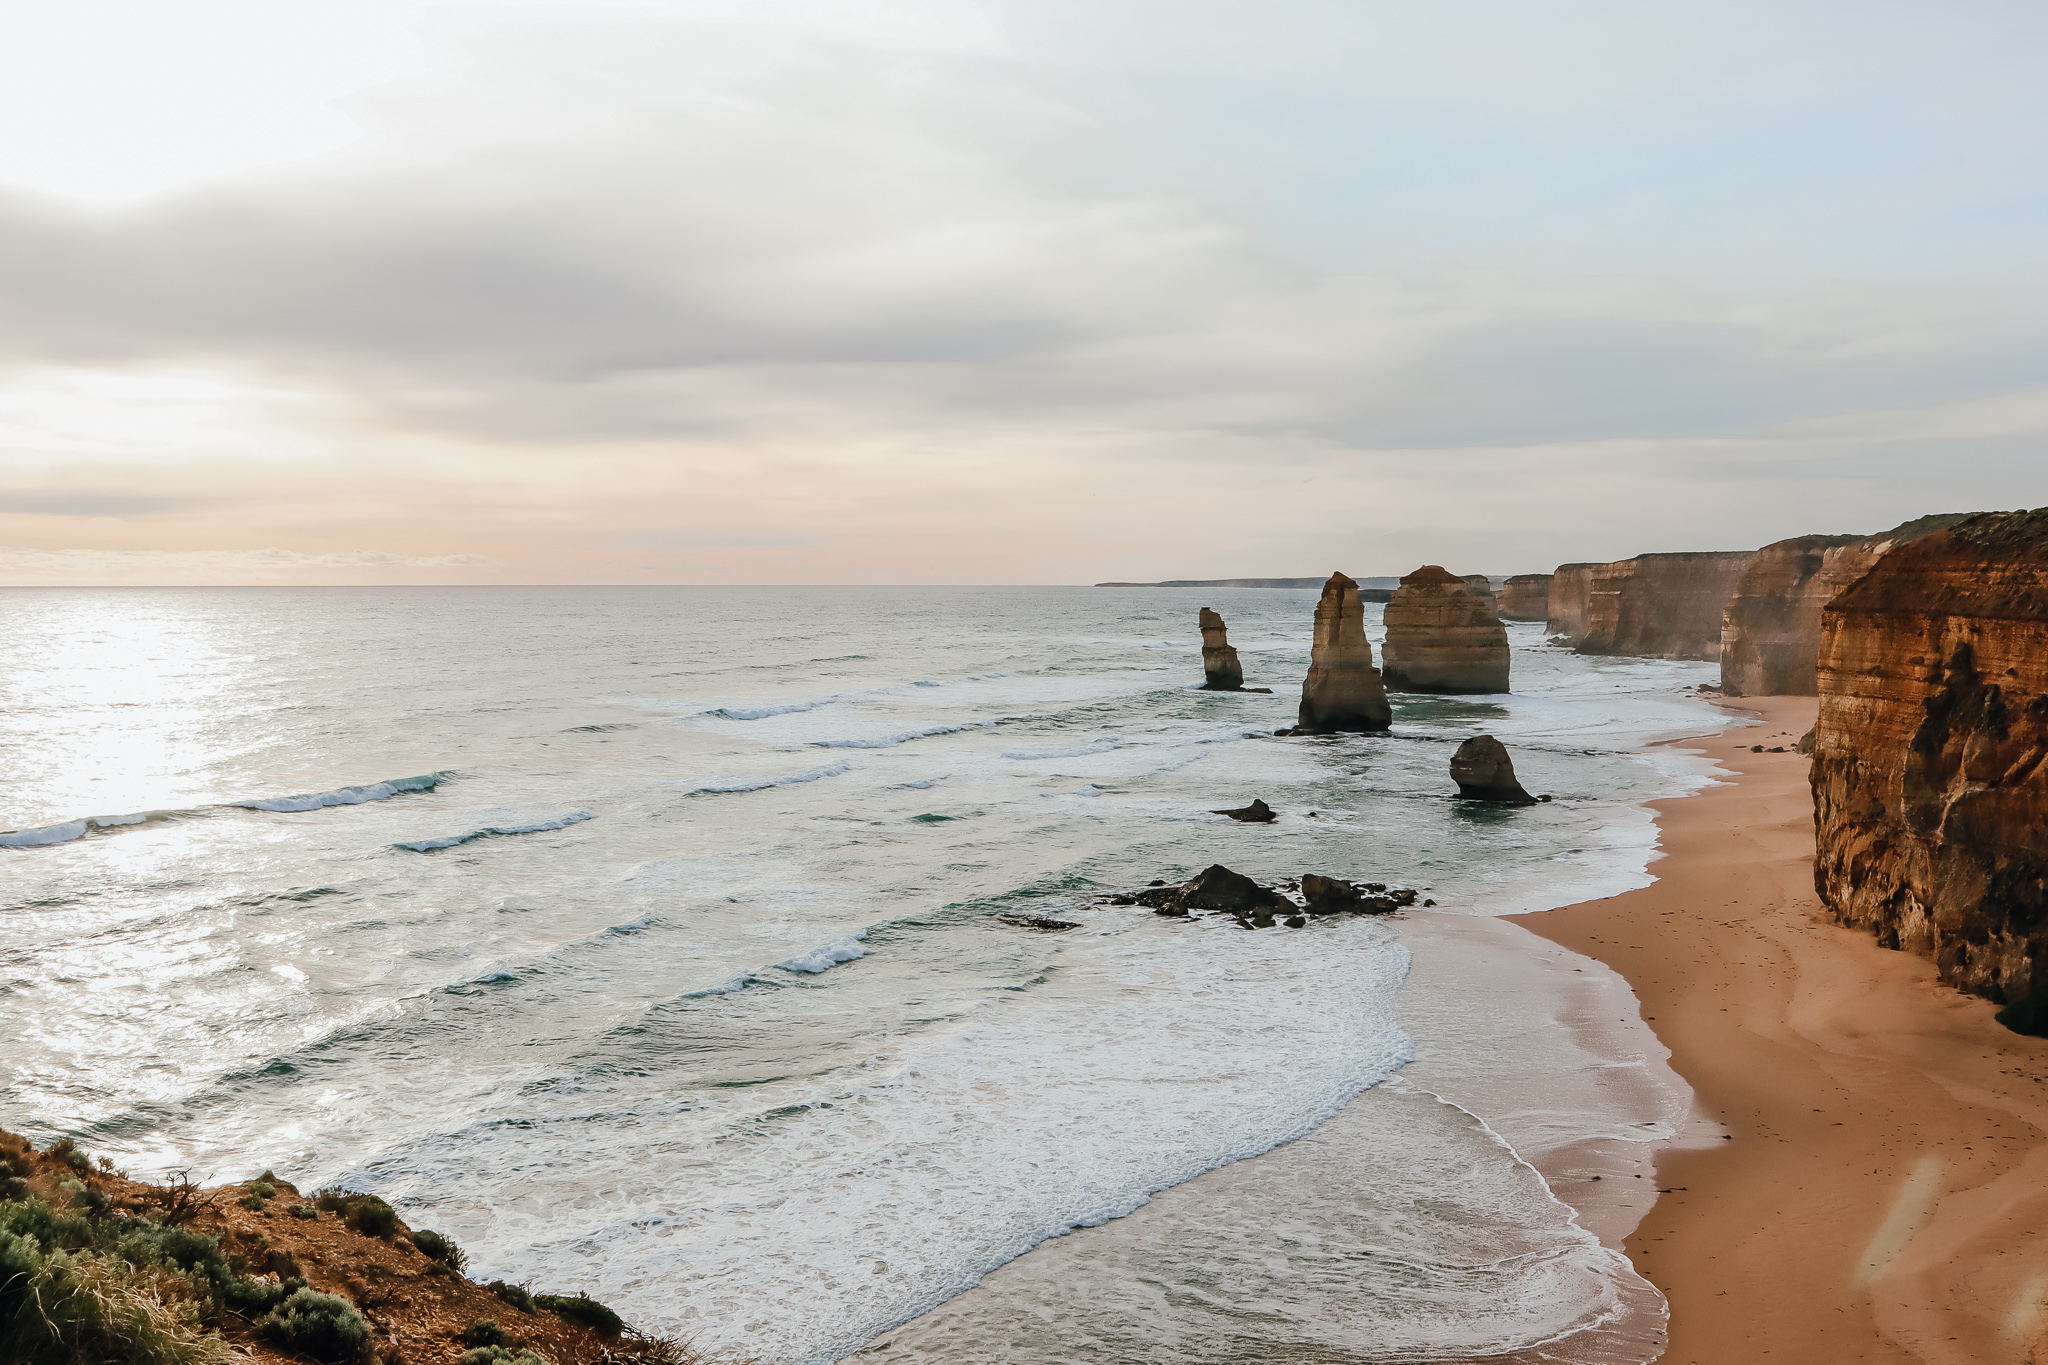 Gog and Magog, the Twelve Apostles along the Great Ocean Road in Australia, Victoria. Also known as Sow and Piglet or The Pinnacles